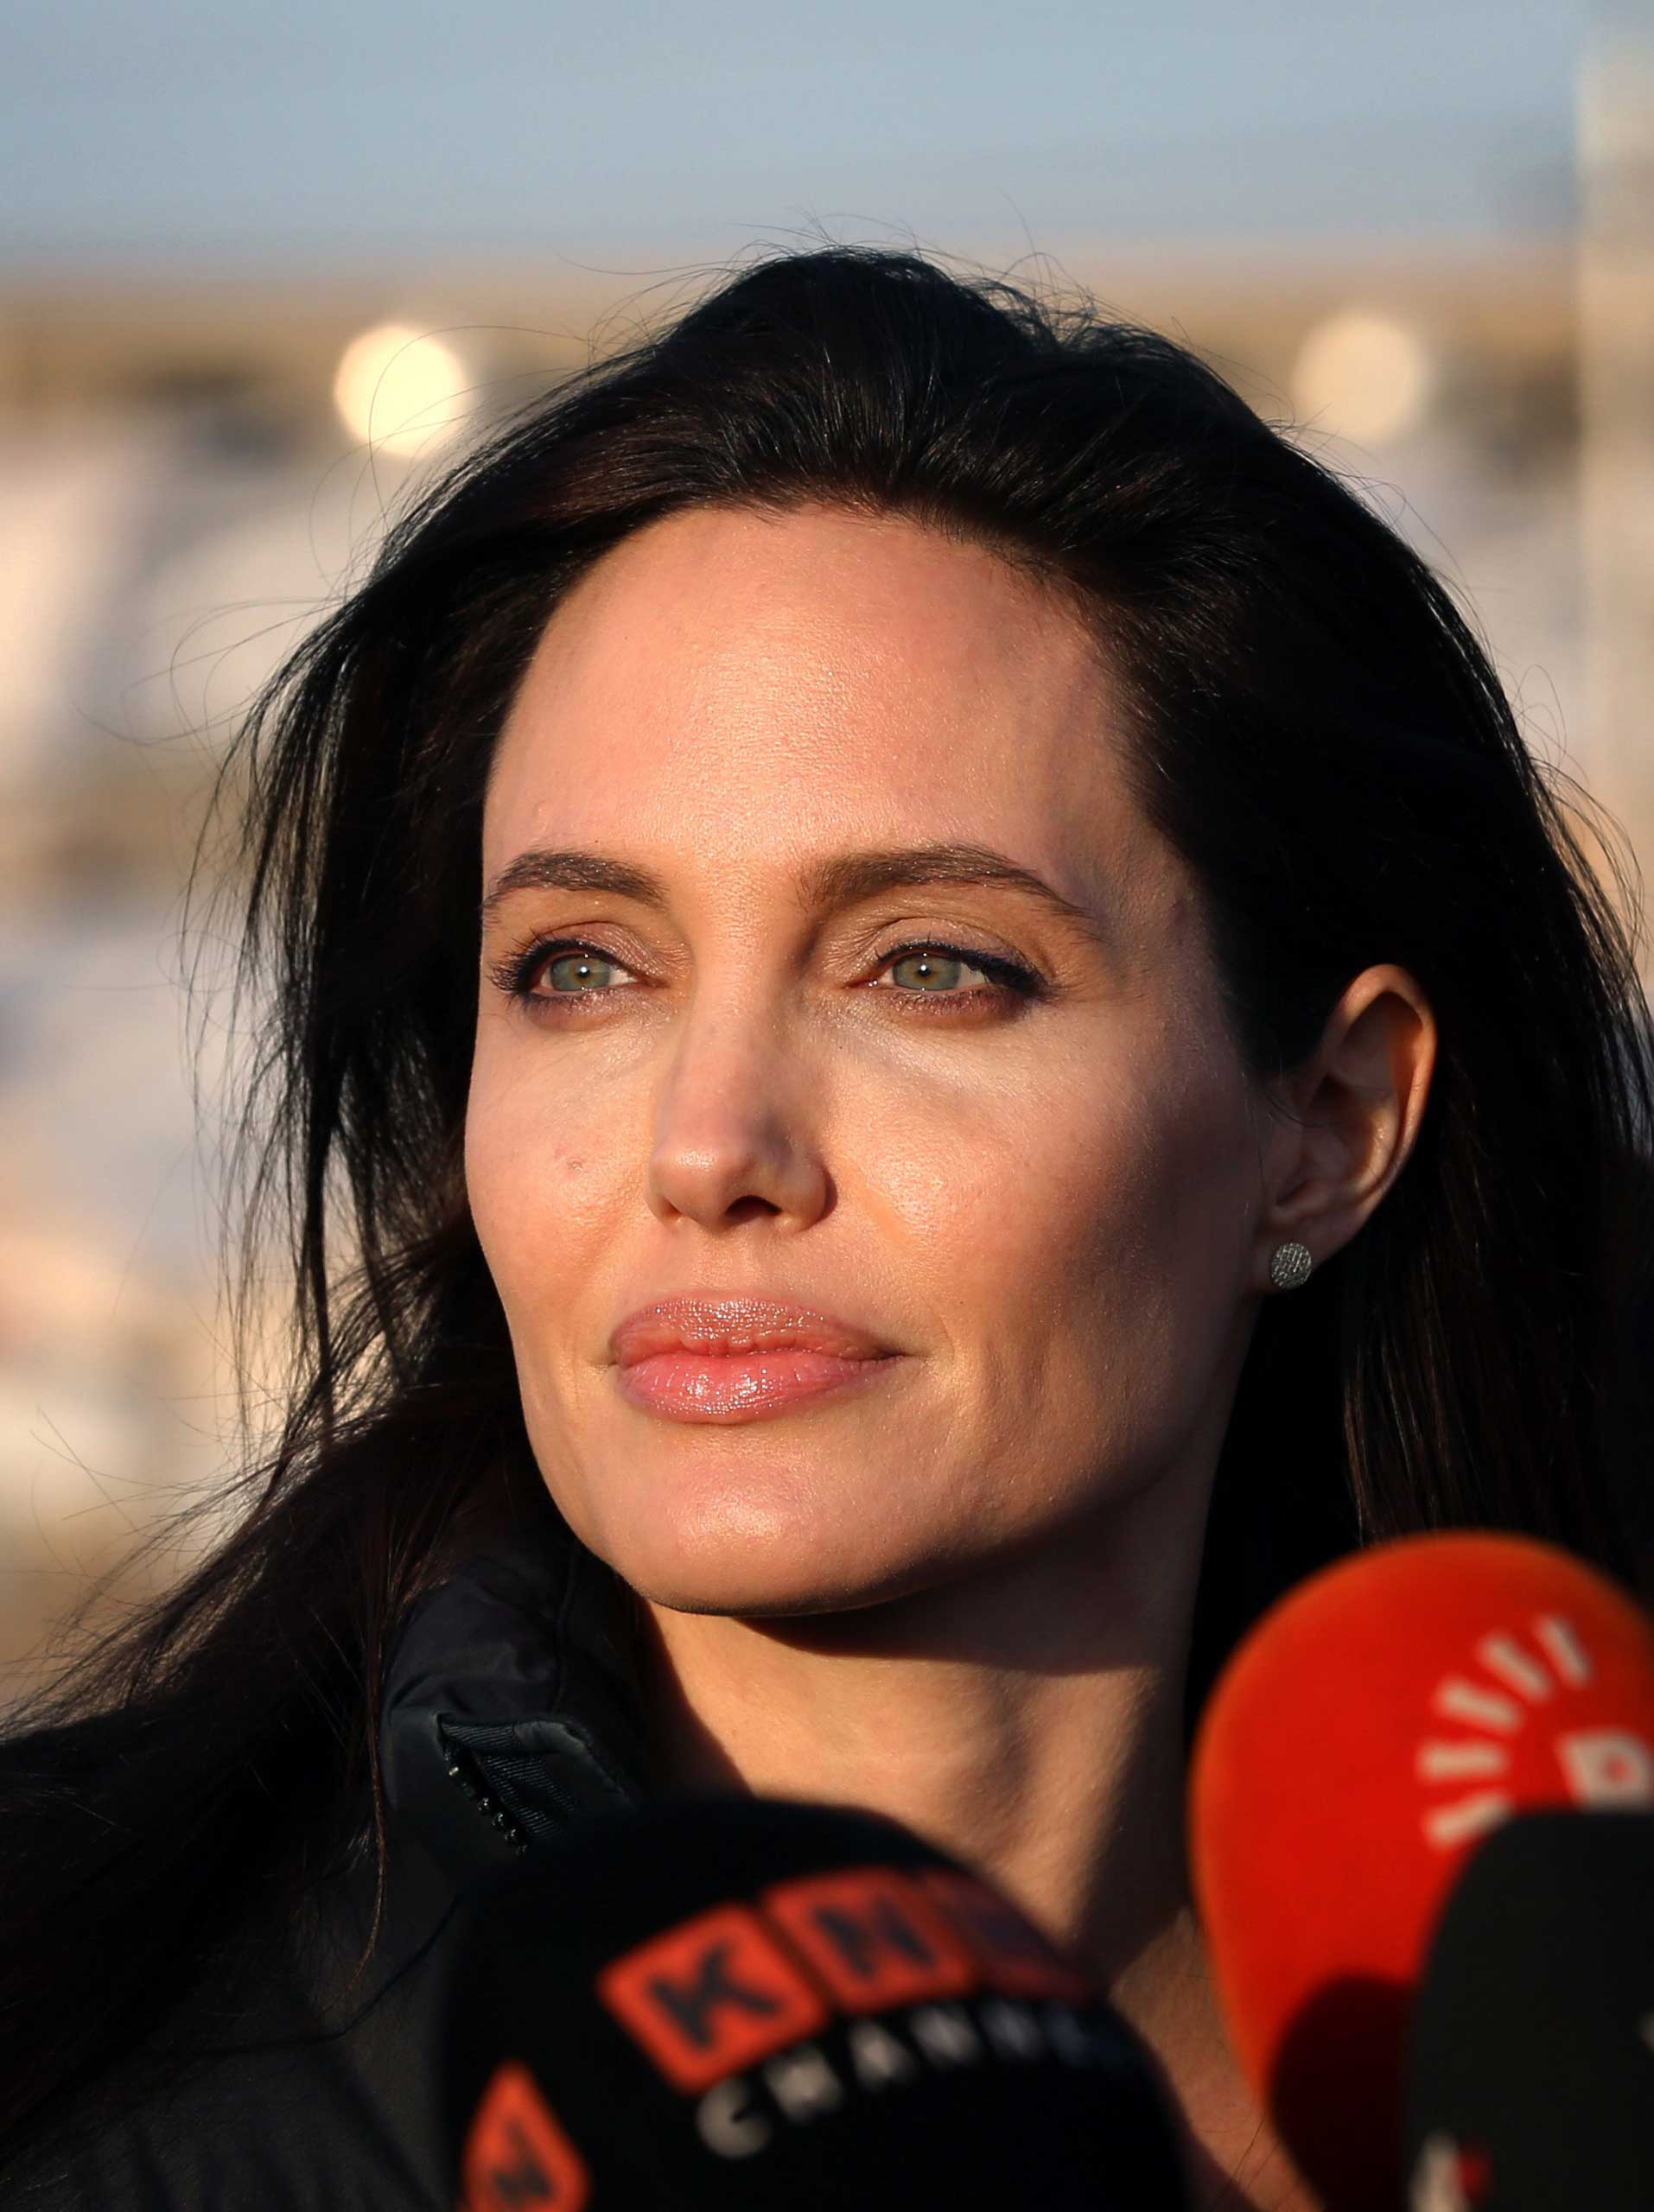 US actress and UNHCR ambassador Angelina Jolie pauses as she delivers a speech during a visit to a camp for displaced Iraqis in Khanke, a few kilometres (miles) from the Turkish border in Iraq's Dohuk province, on Jan. 25, 2015.